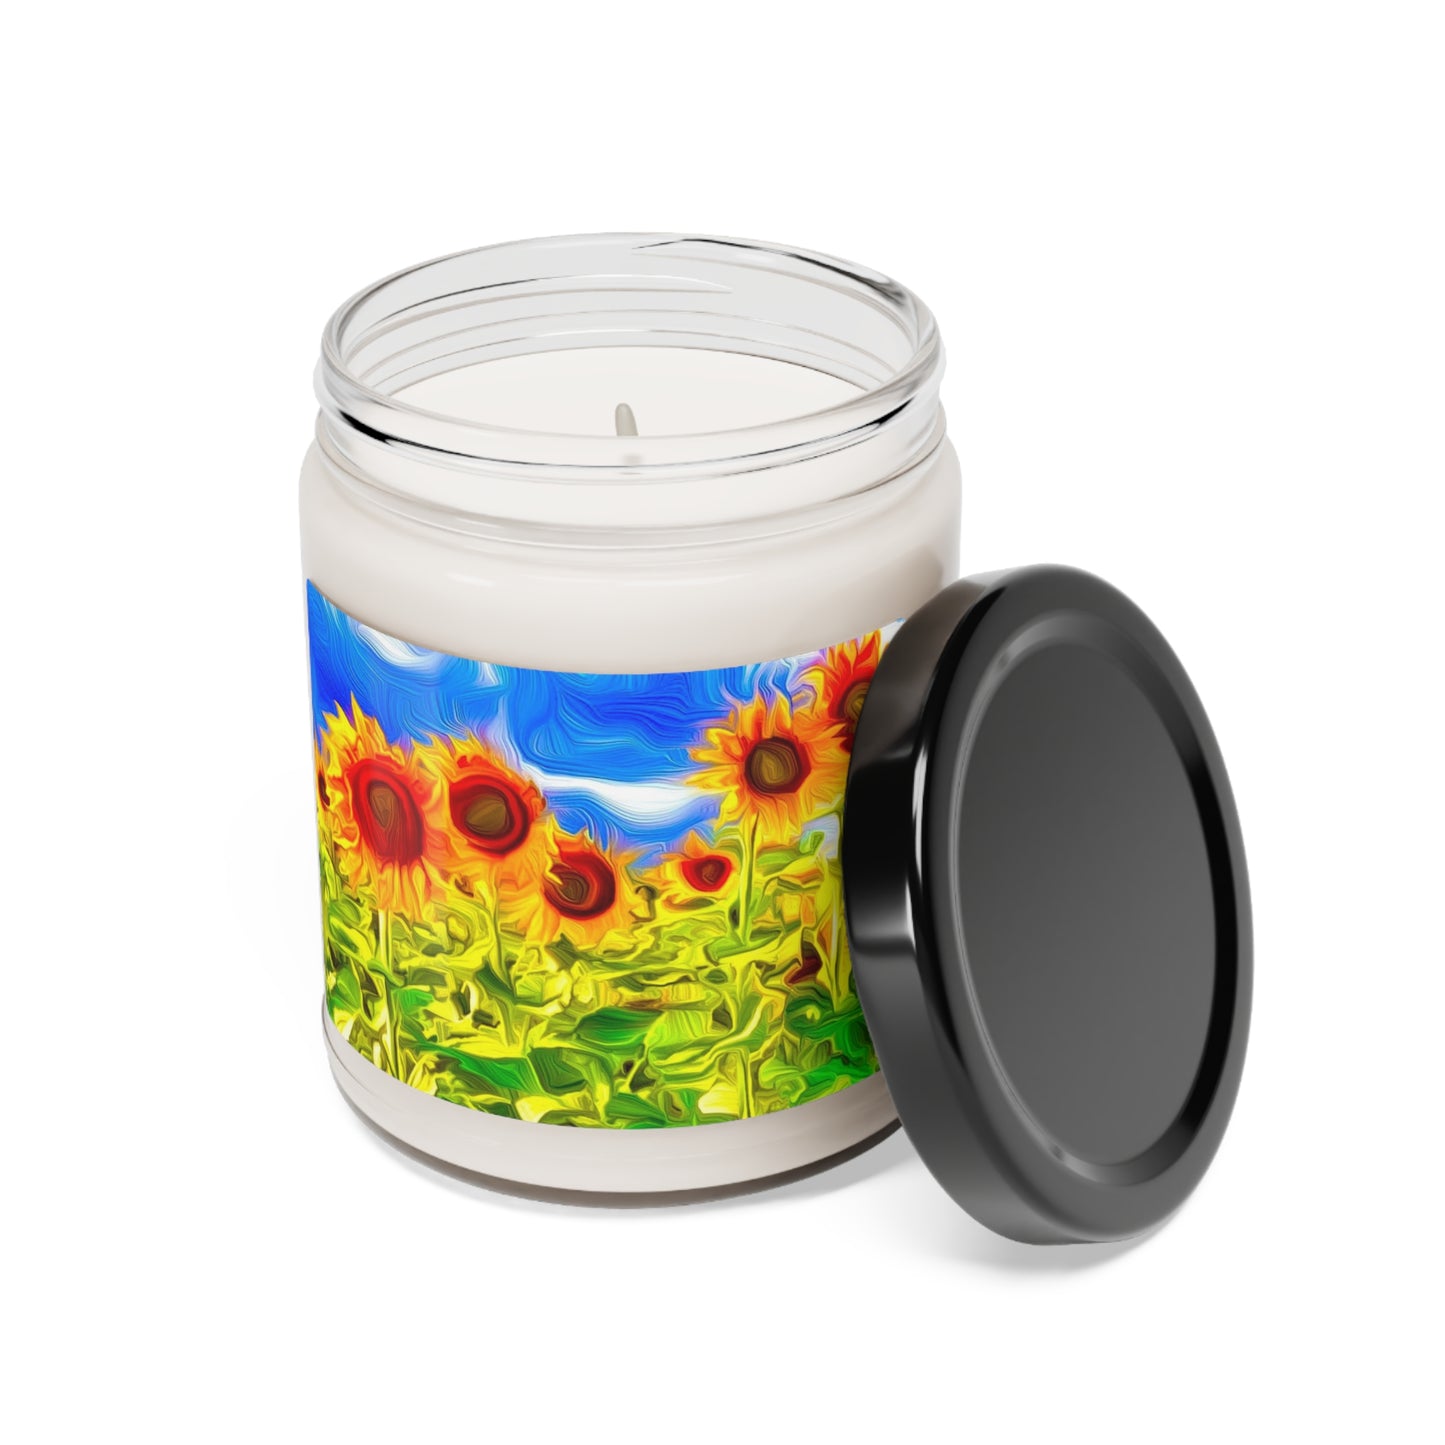 Sunflower Fantasies- Scented Soy Candle, 9oz